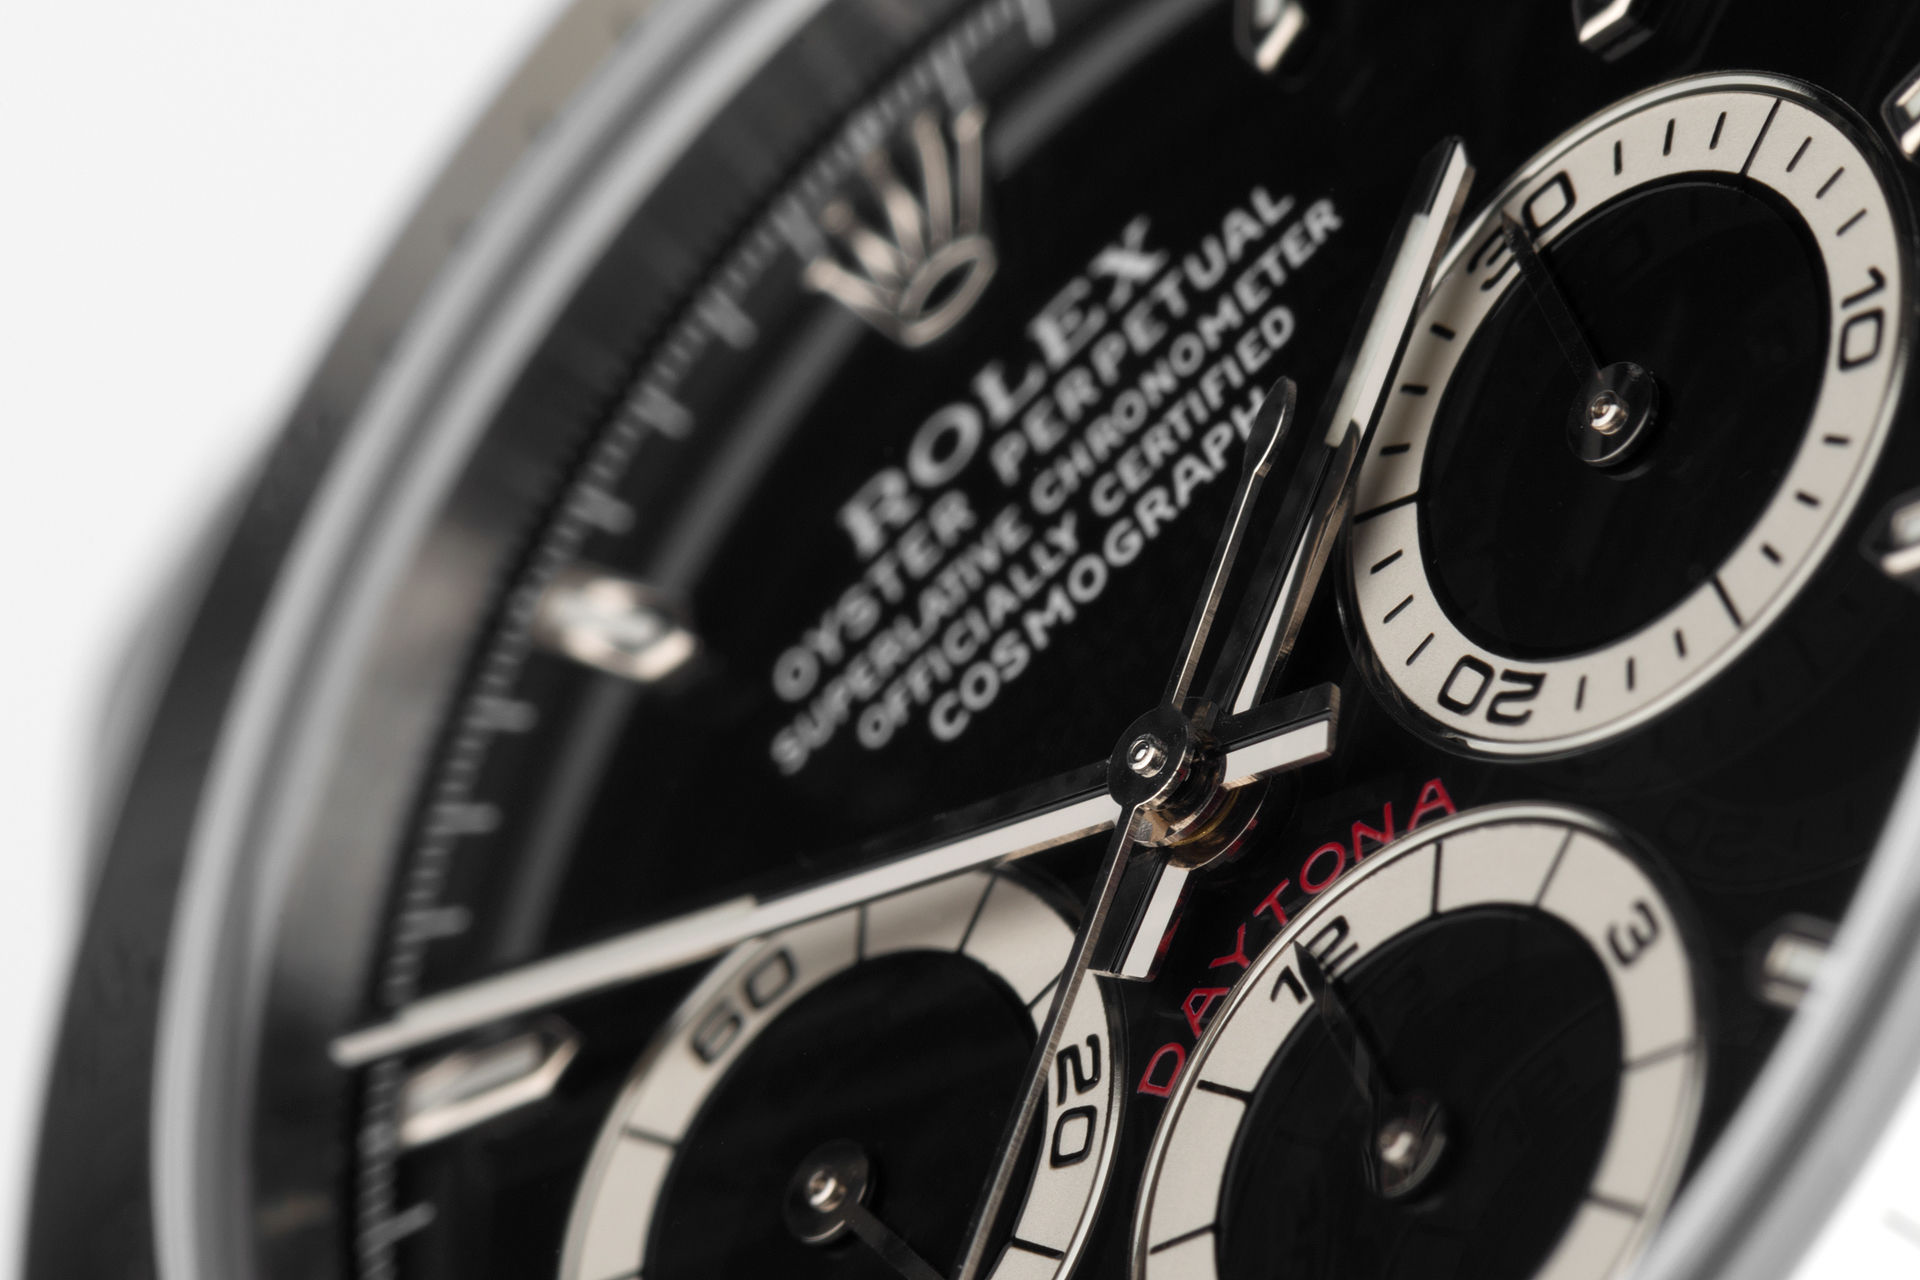 ref 16520 | 'Final Tritium' Punched Papers | Rolex Cosmograph Daytona